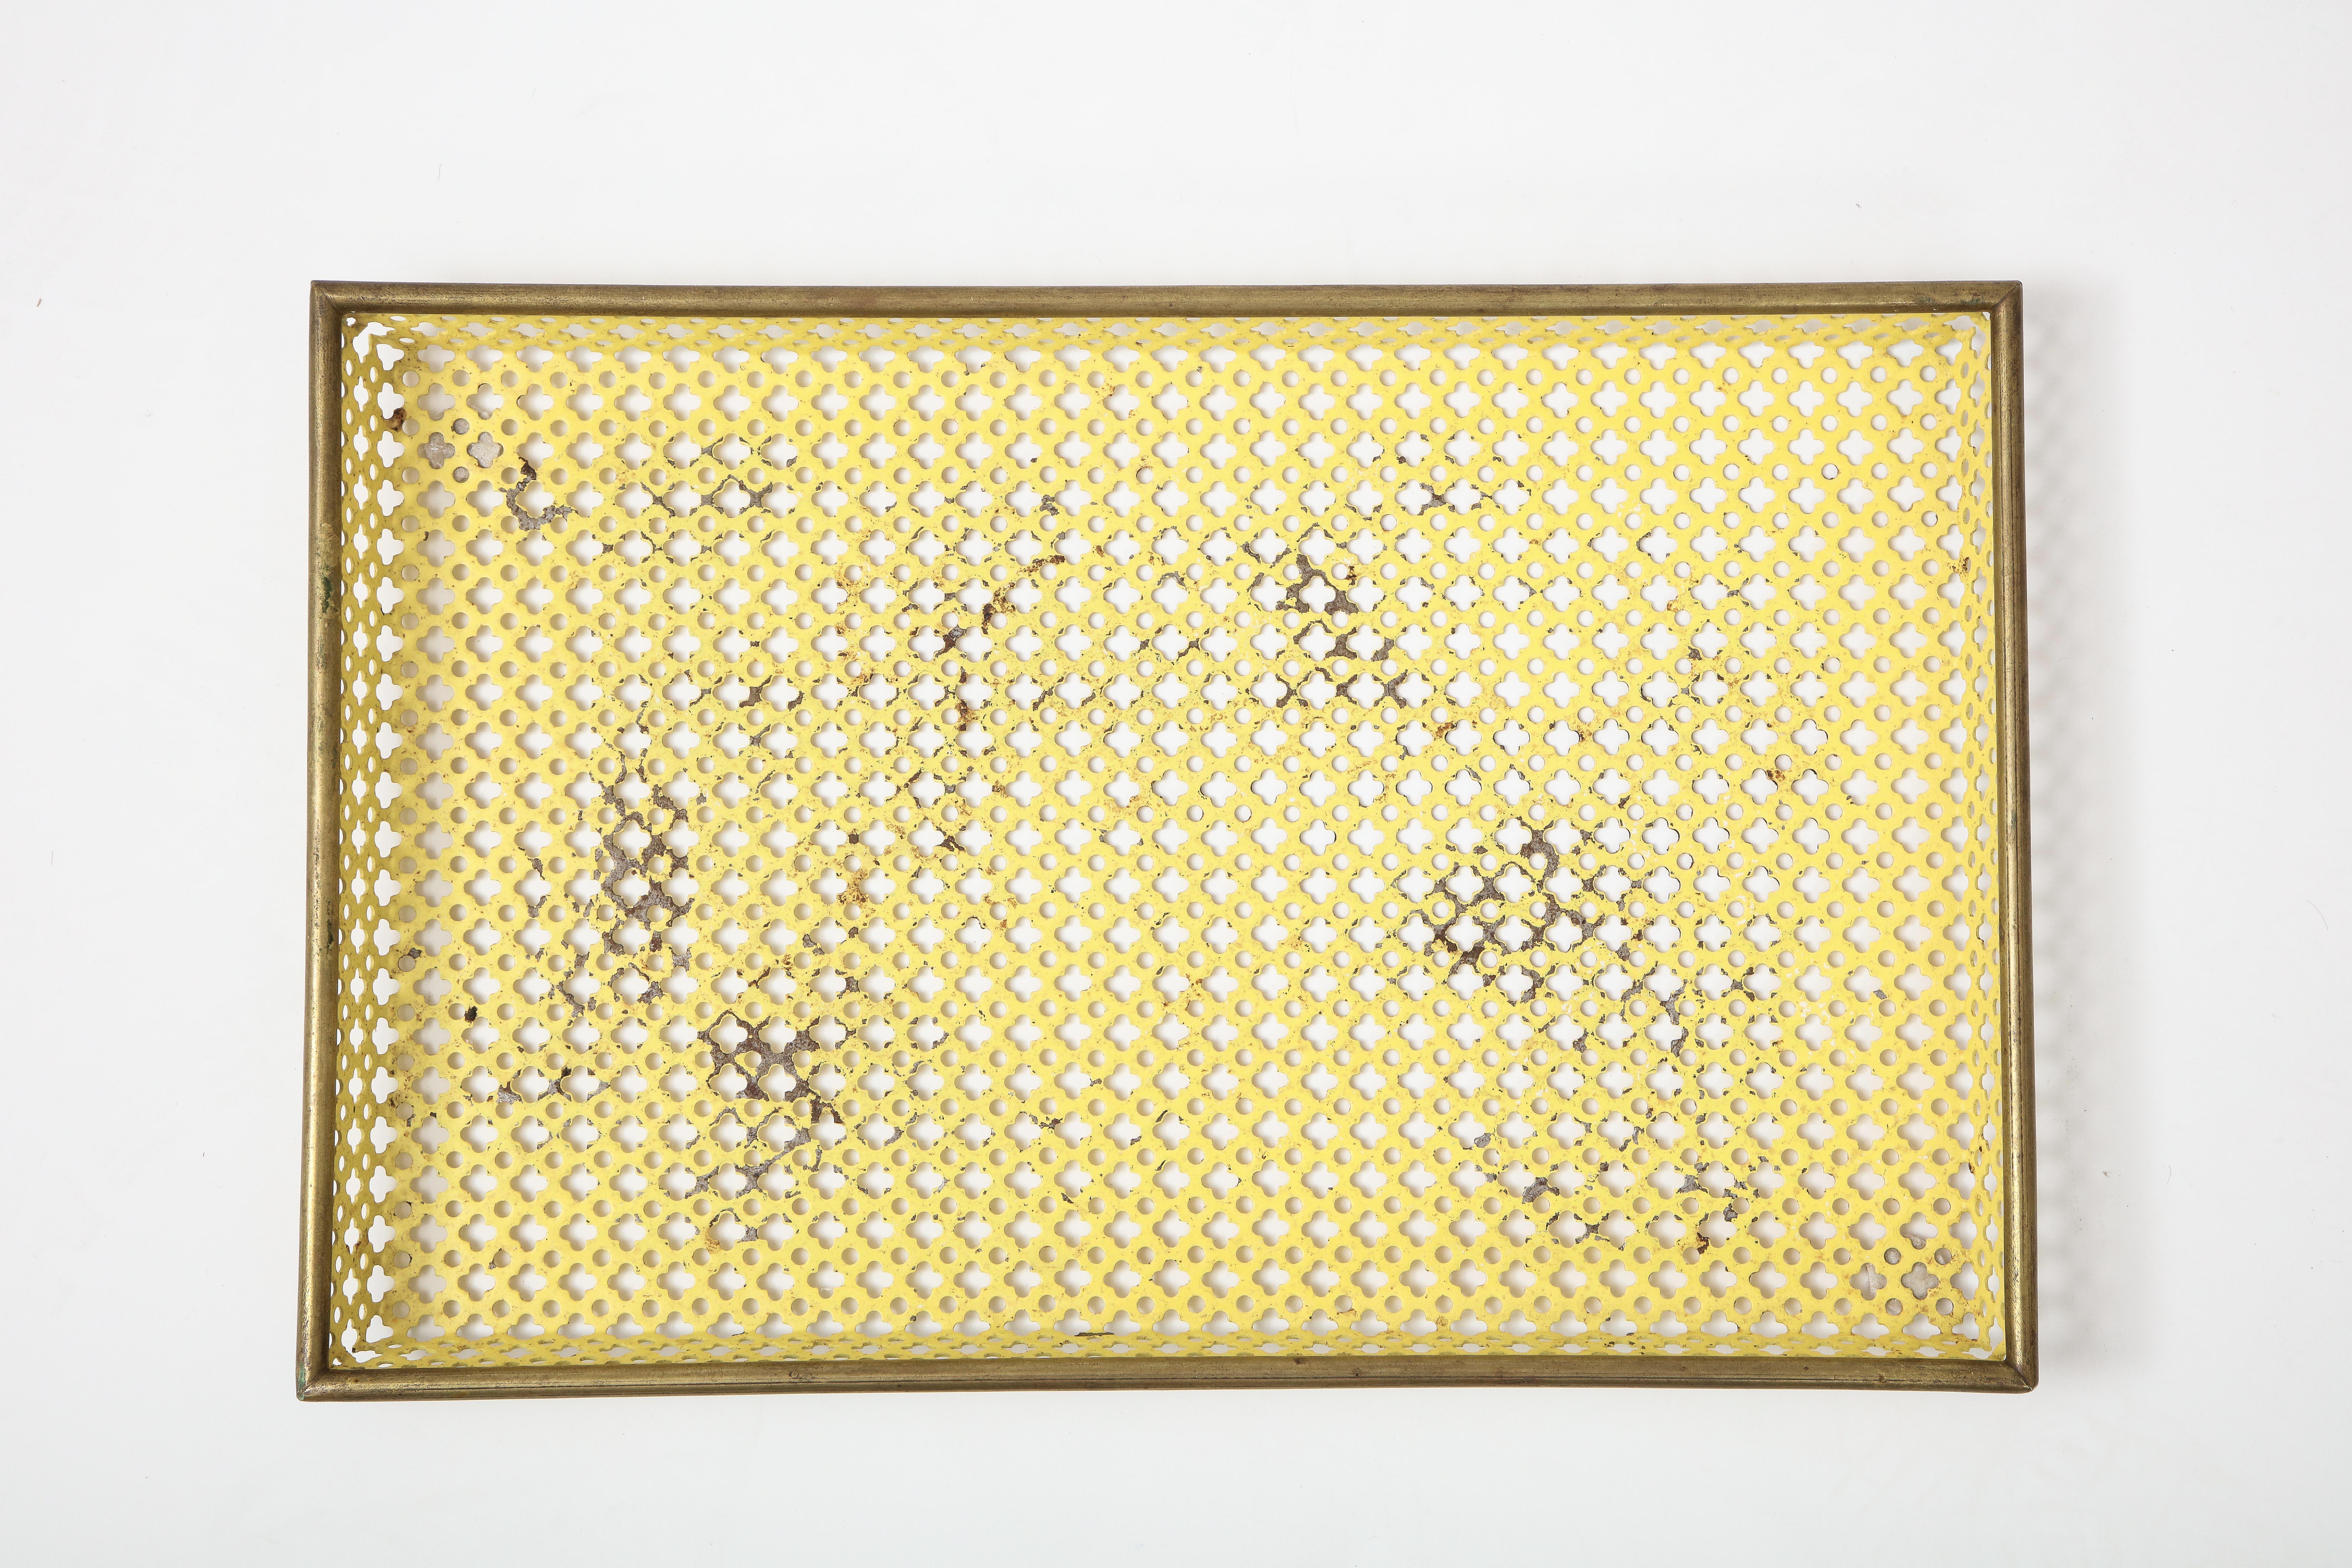 Mathieu Matégot (1910-2001)
Yellow Tray, France, c. 1950
Perforated Metal, brass rod detail, enamel
Measures: H 1.5 D 11.5 W 17.25 in.

Provenance: Collection of an architect, France

Bibliography: JOUSSE ENTREPRISE, 